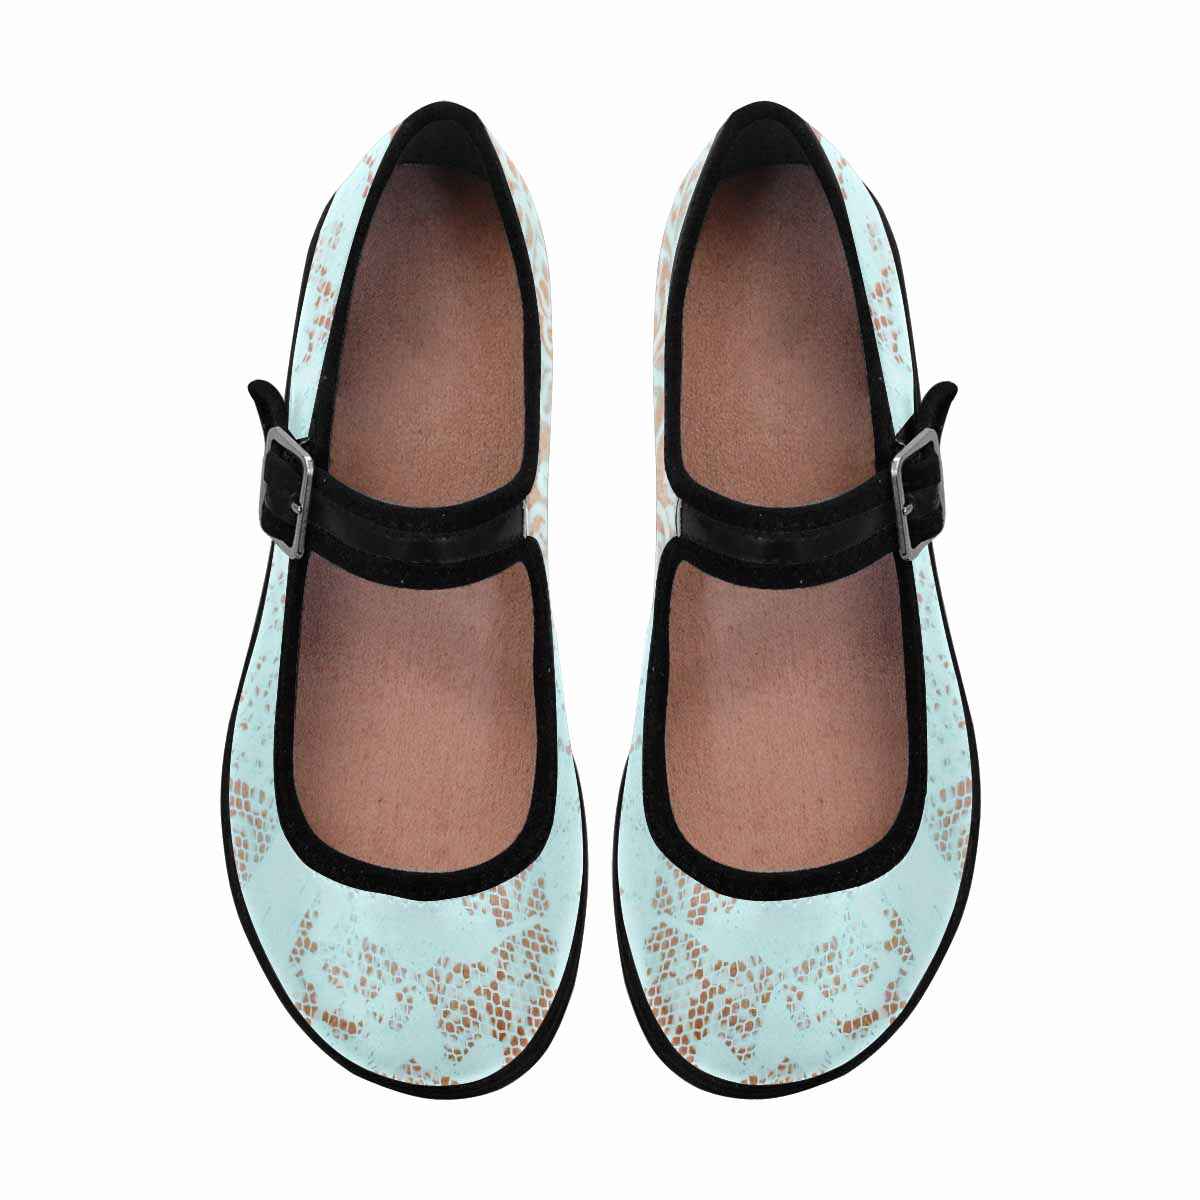 Victorian lace print, cute, vintage style women's Mary Jane shoes, design 23